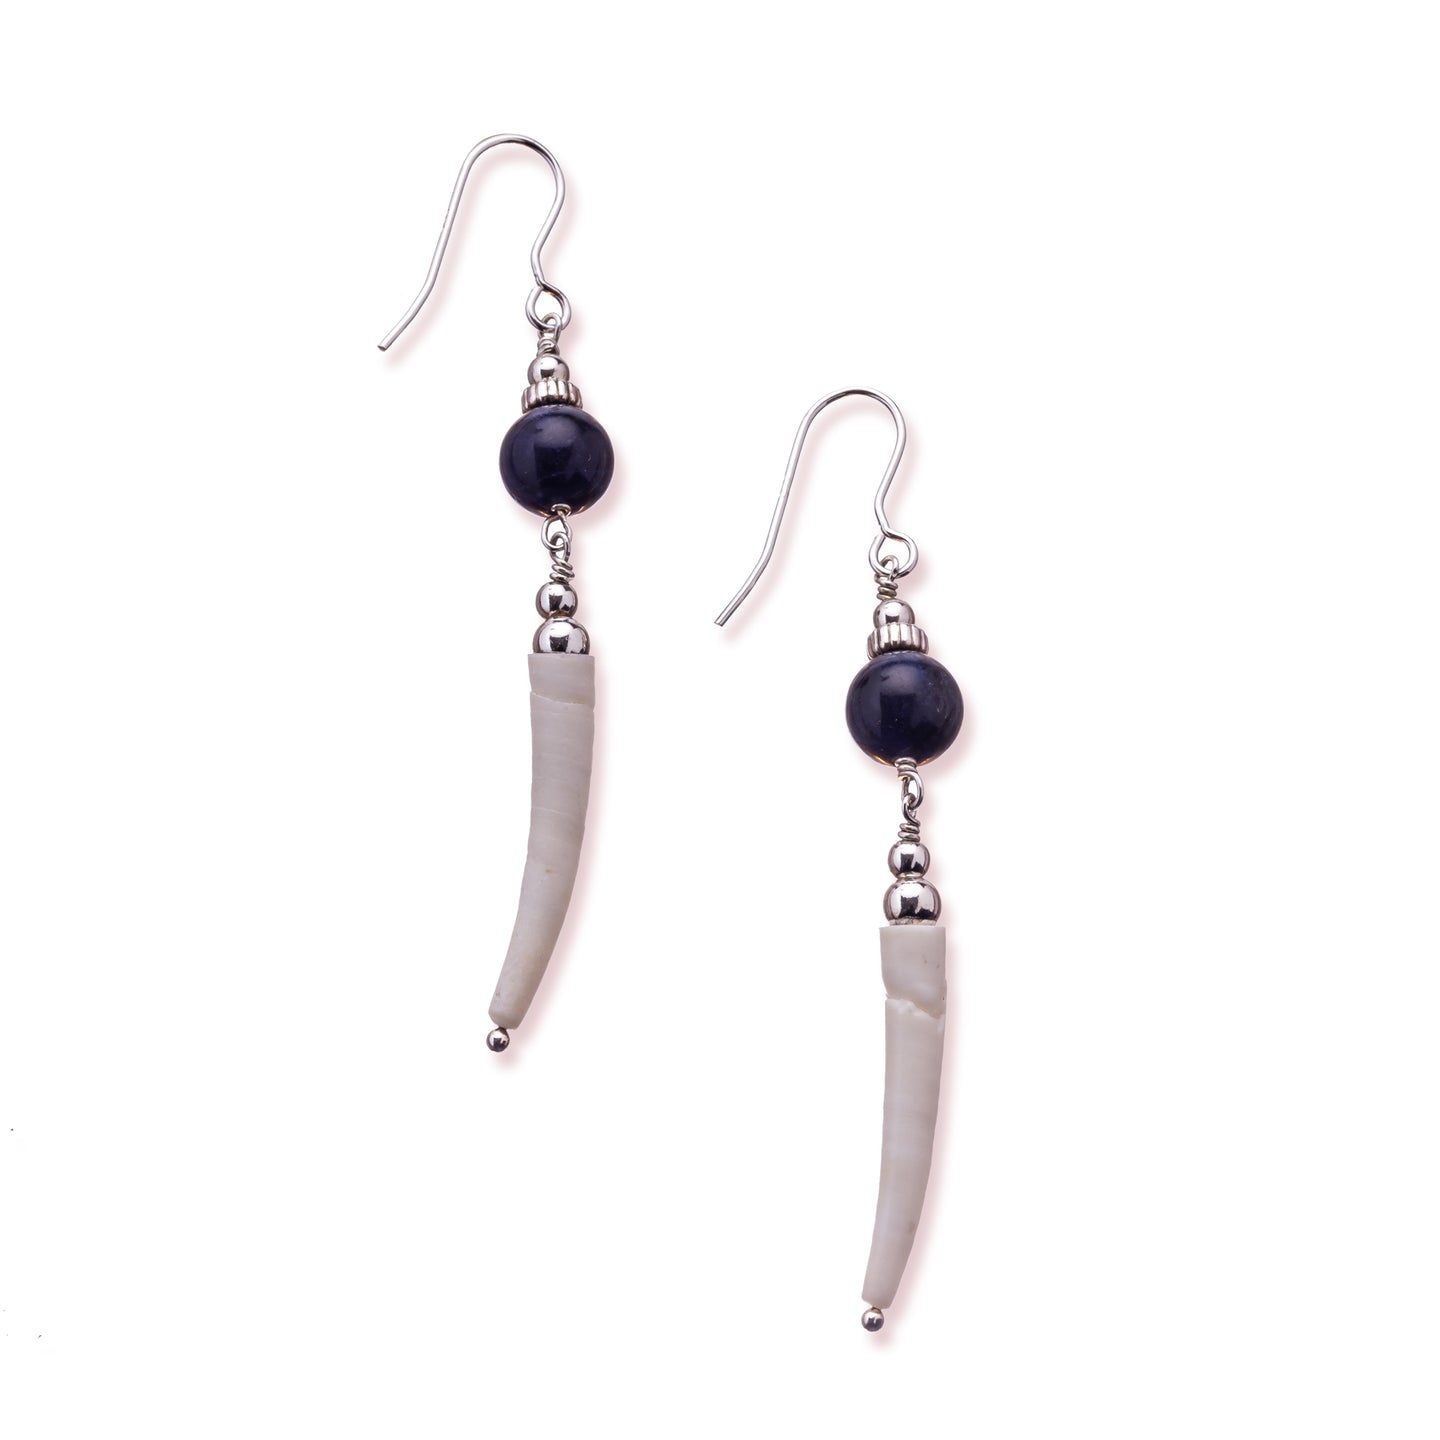 Simple drop earrings using natural Irish tusk shells in a soft off white colour.  A sodalite stone sits above the shell with a small silver disc and bead on top.  These earrings are approximately 5cm in drop length from the base of the ear wire.  They are lightweight with backs included. They come beautifully presented in an eco friendly branded gift box for safe keeping.  Designed and Handmade in Dingle.  Due to the nature of the materials used, each pair will differ slightly from the image shown